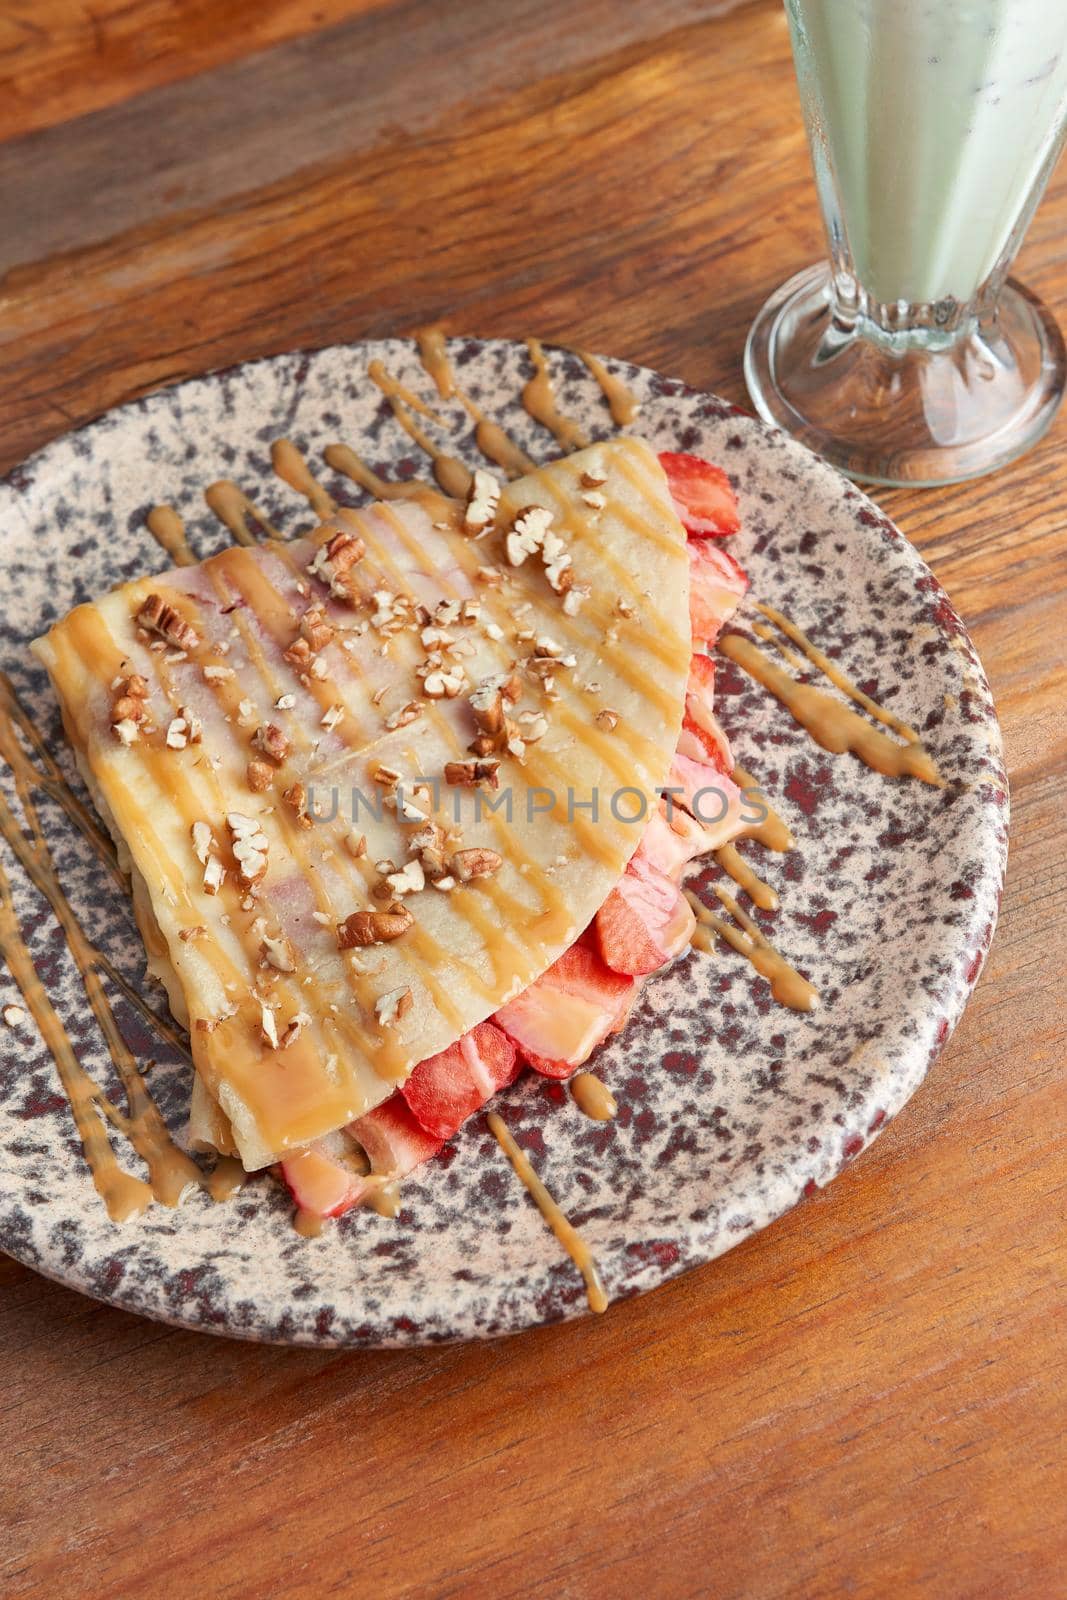 photo of delicious crepe with strawberry, walnut and decorated with cajeta, served with vanilla malteda sweet crepe.